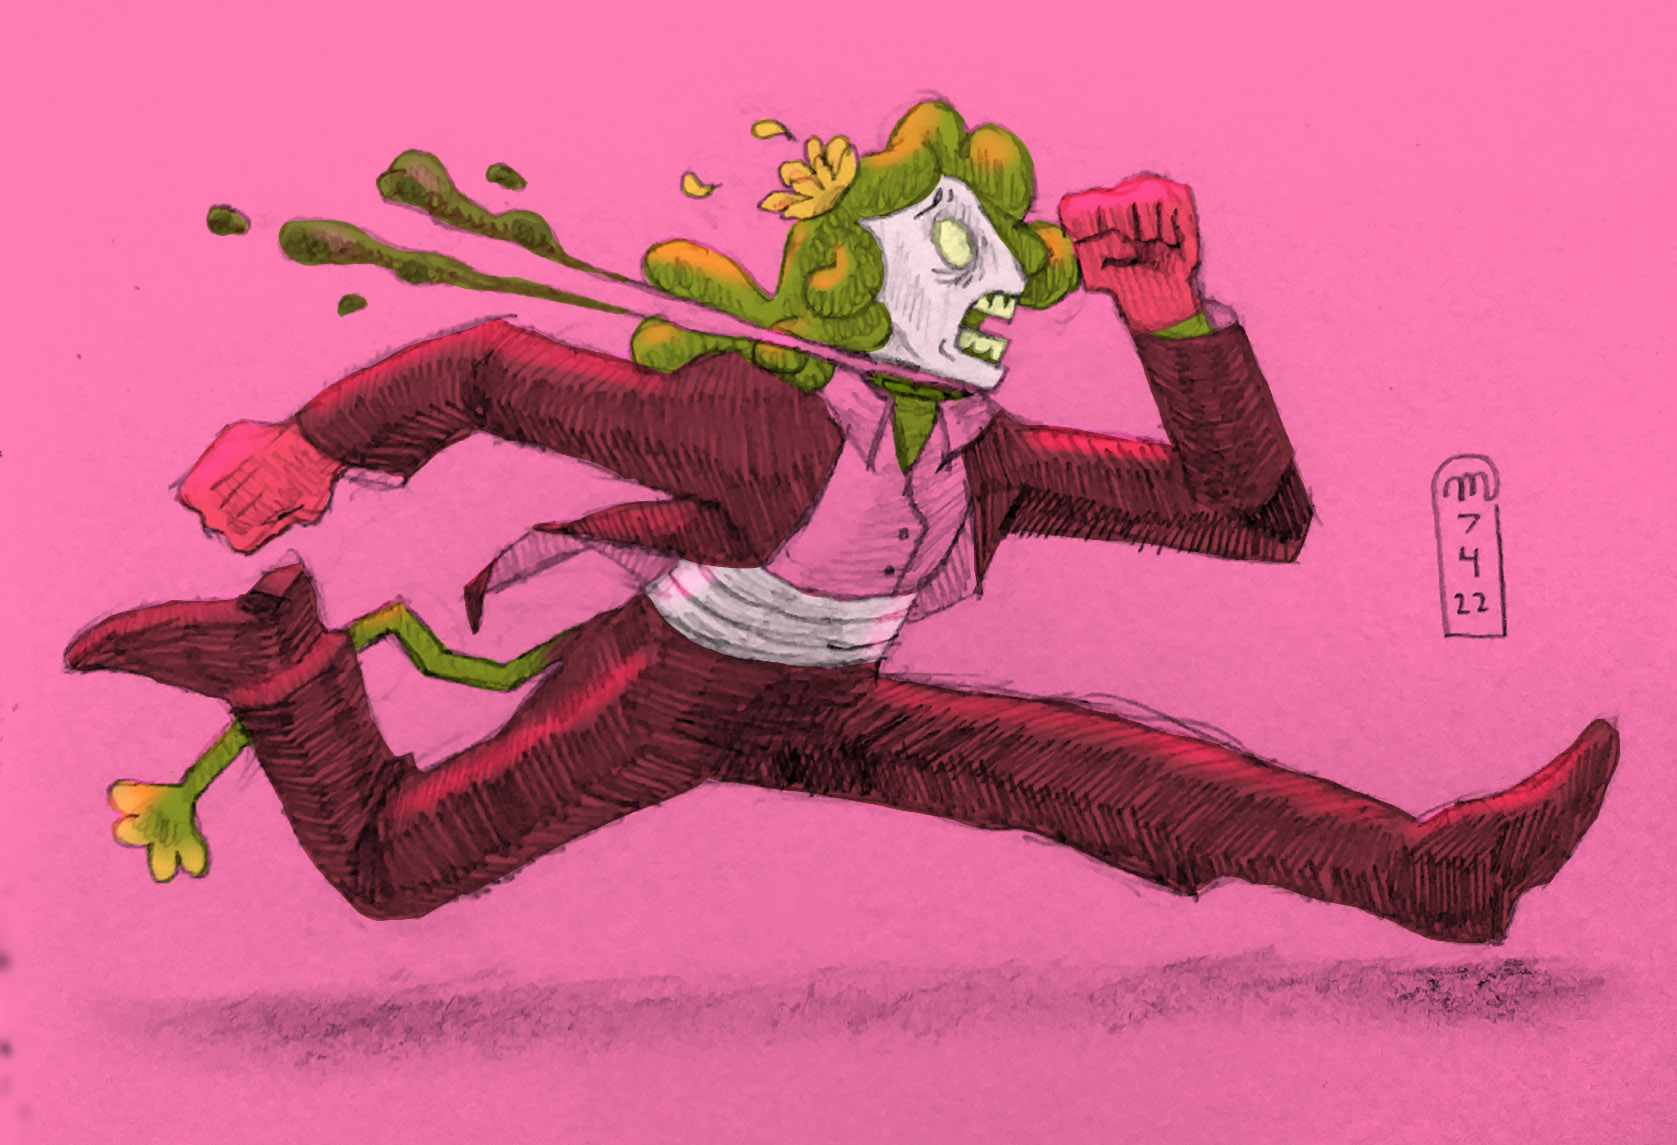 A decapitated humanoid figure with green skin, a black and pink formal suit, and a flower for a tail, running with a terrified expression.